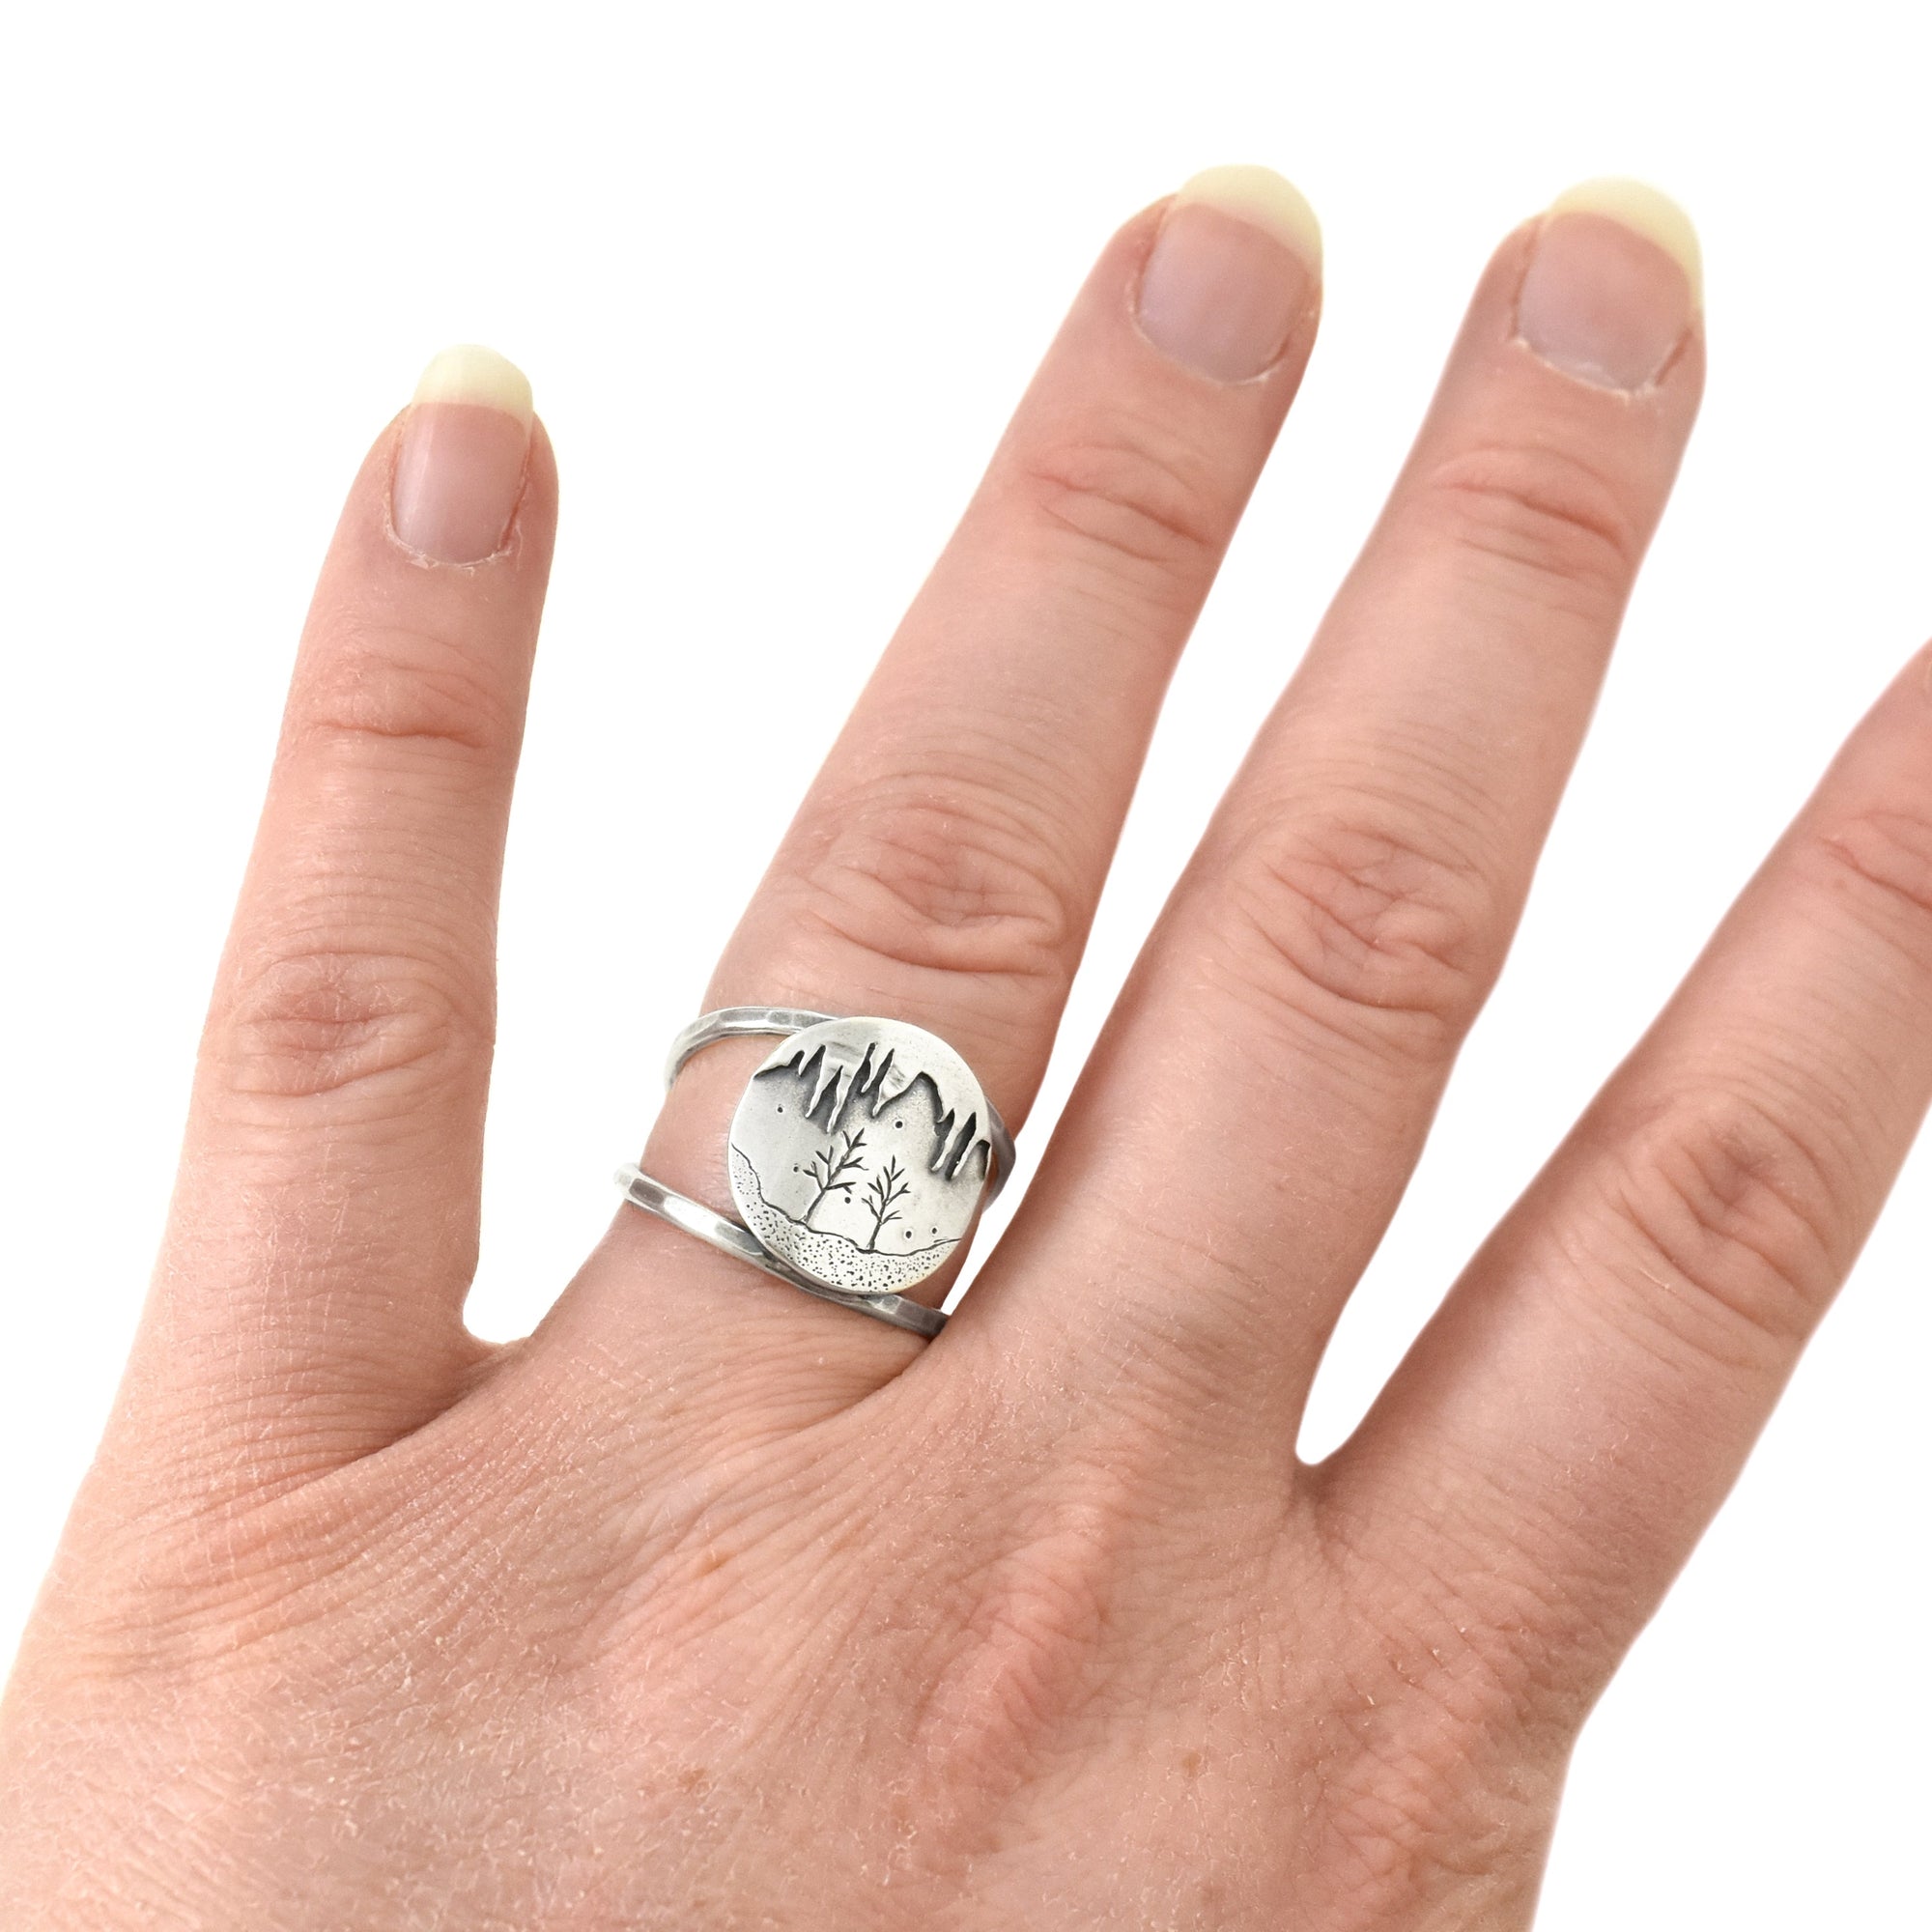 Eben Ice Caves Ring - Ring  Select Size  4 6628 - handmade by Beth Millner Jewelry